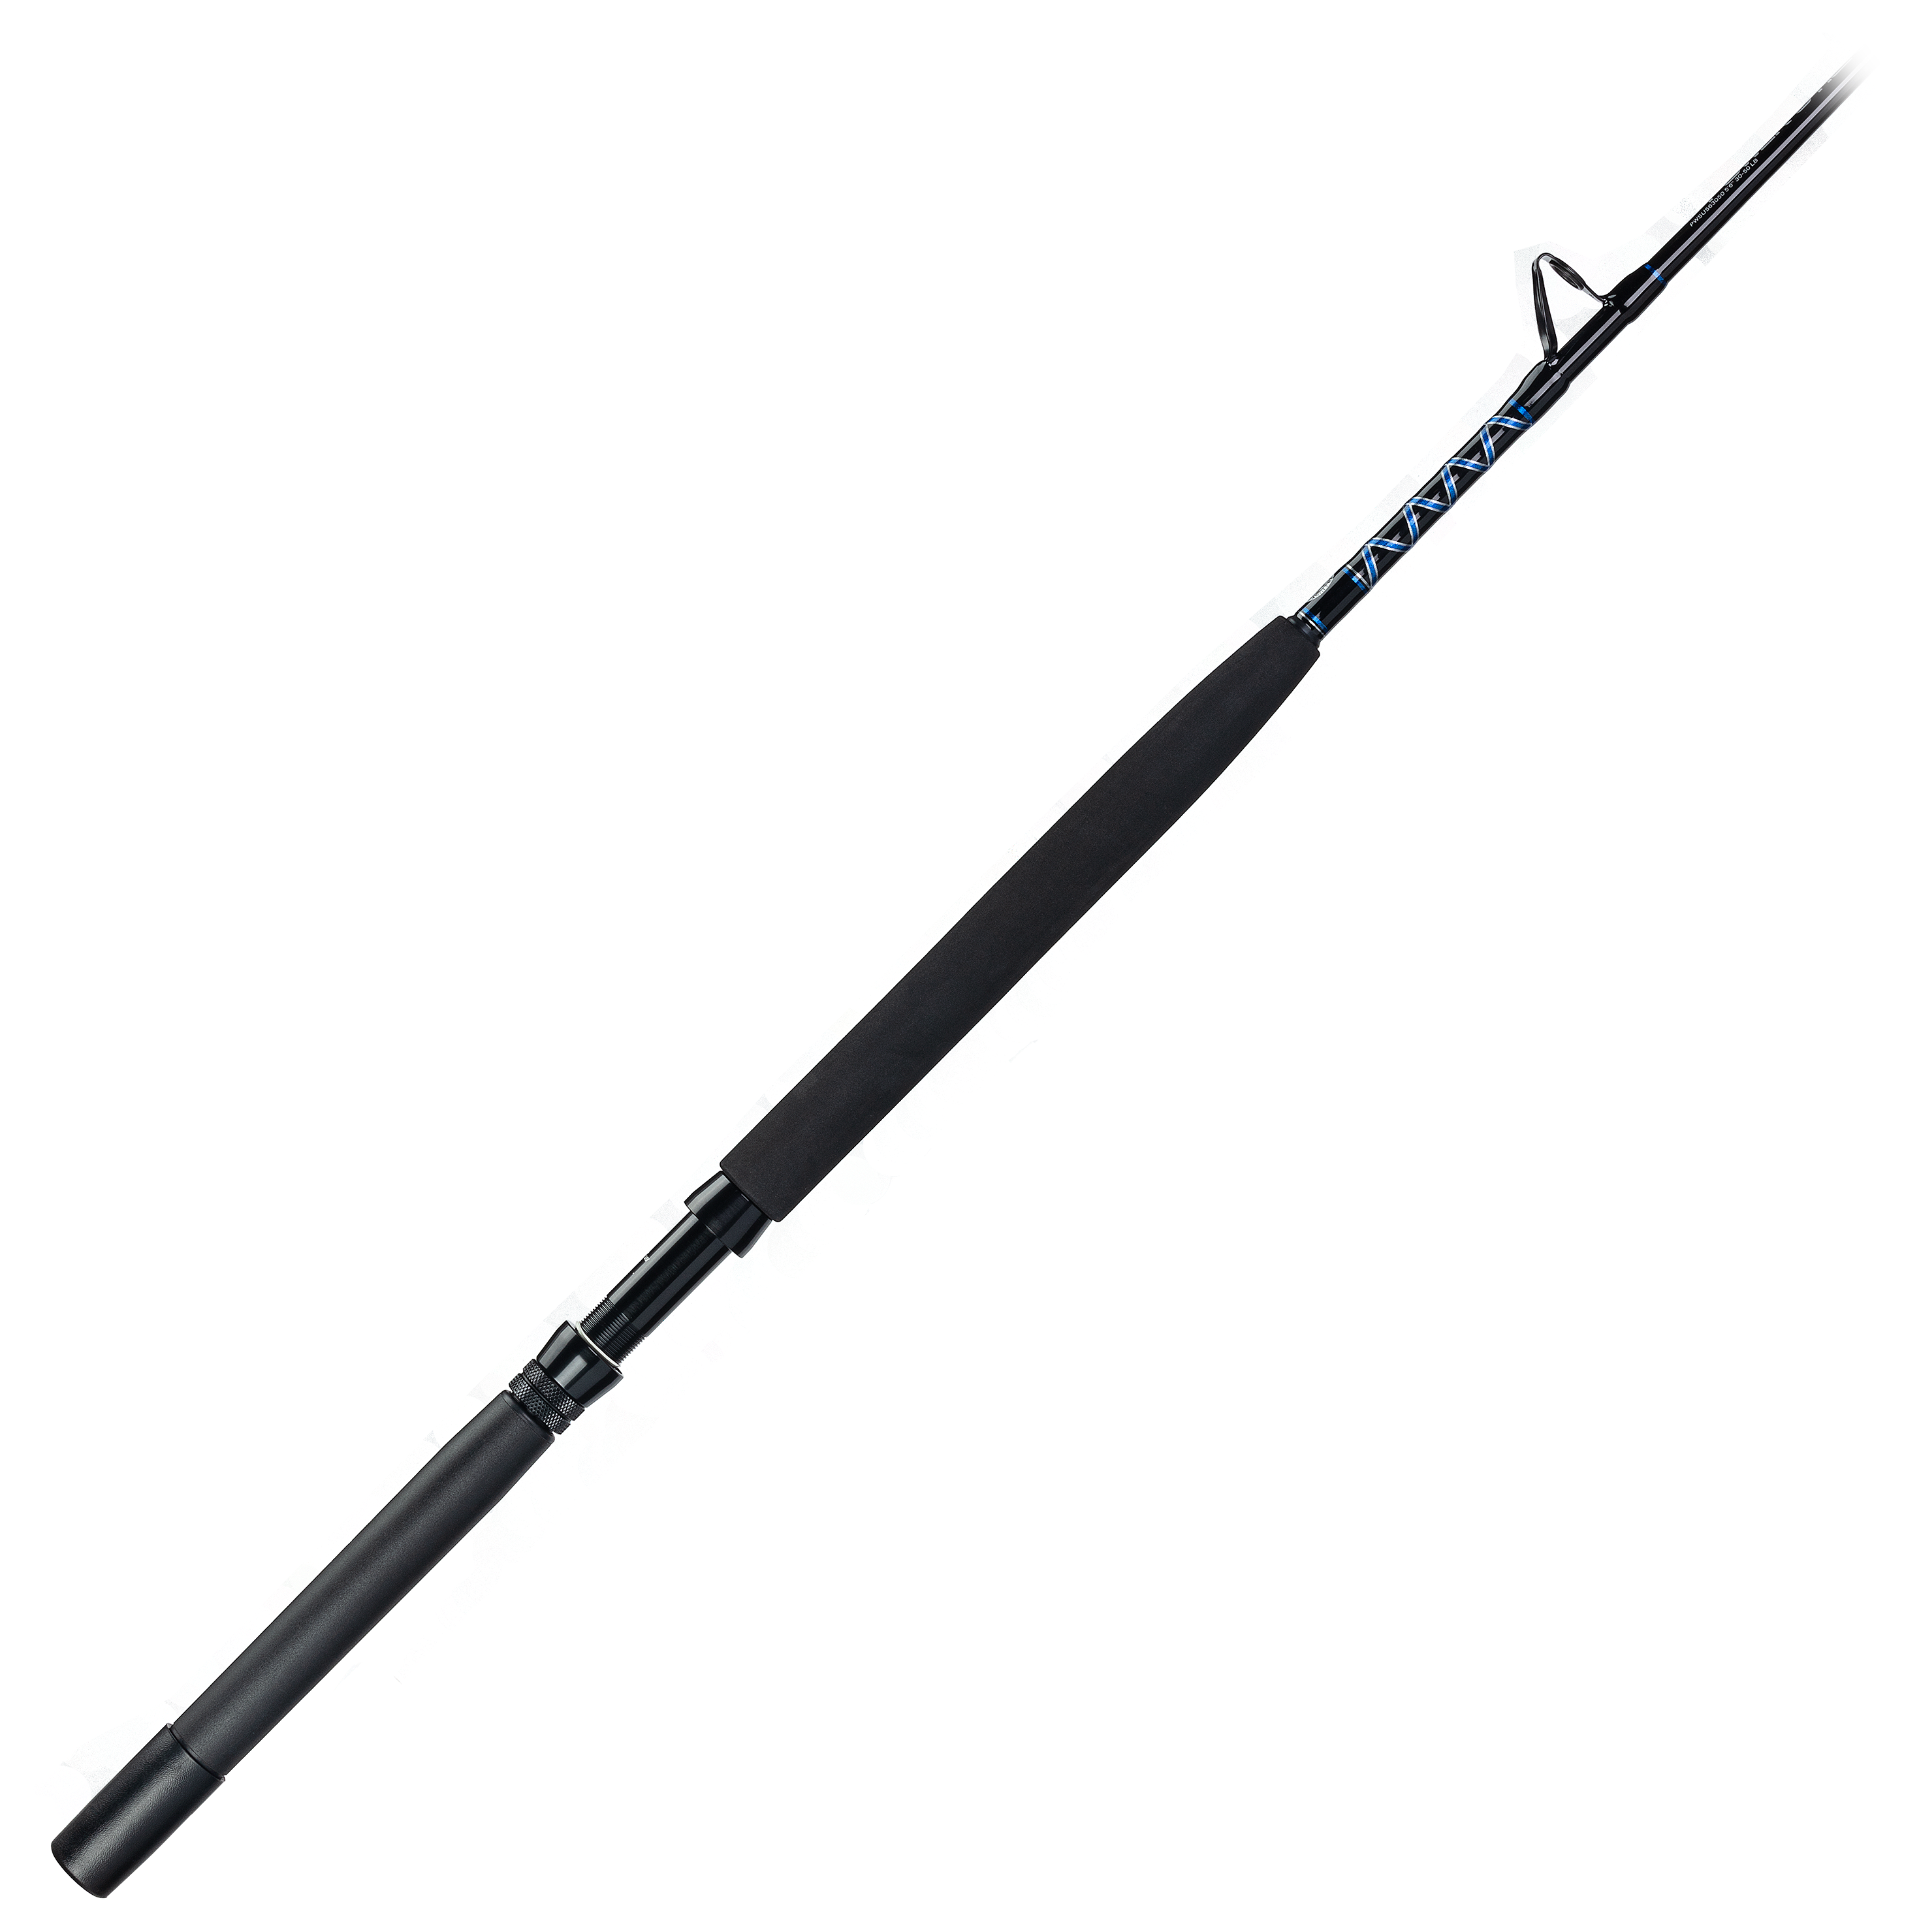 Offshore Angler Sea Lion Conventional Rod - Model SL661530C